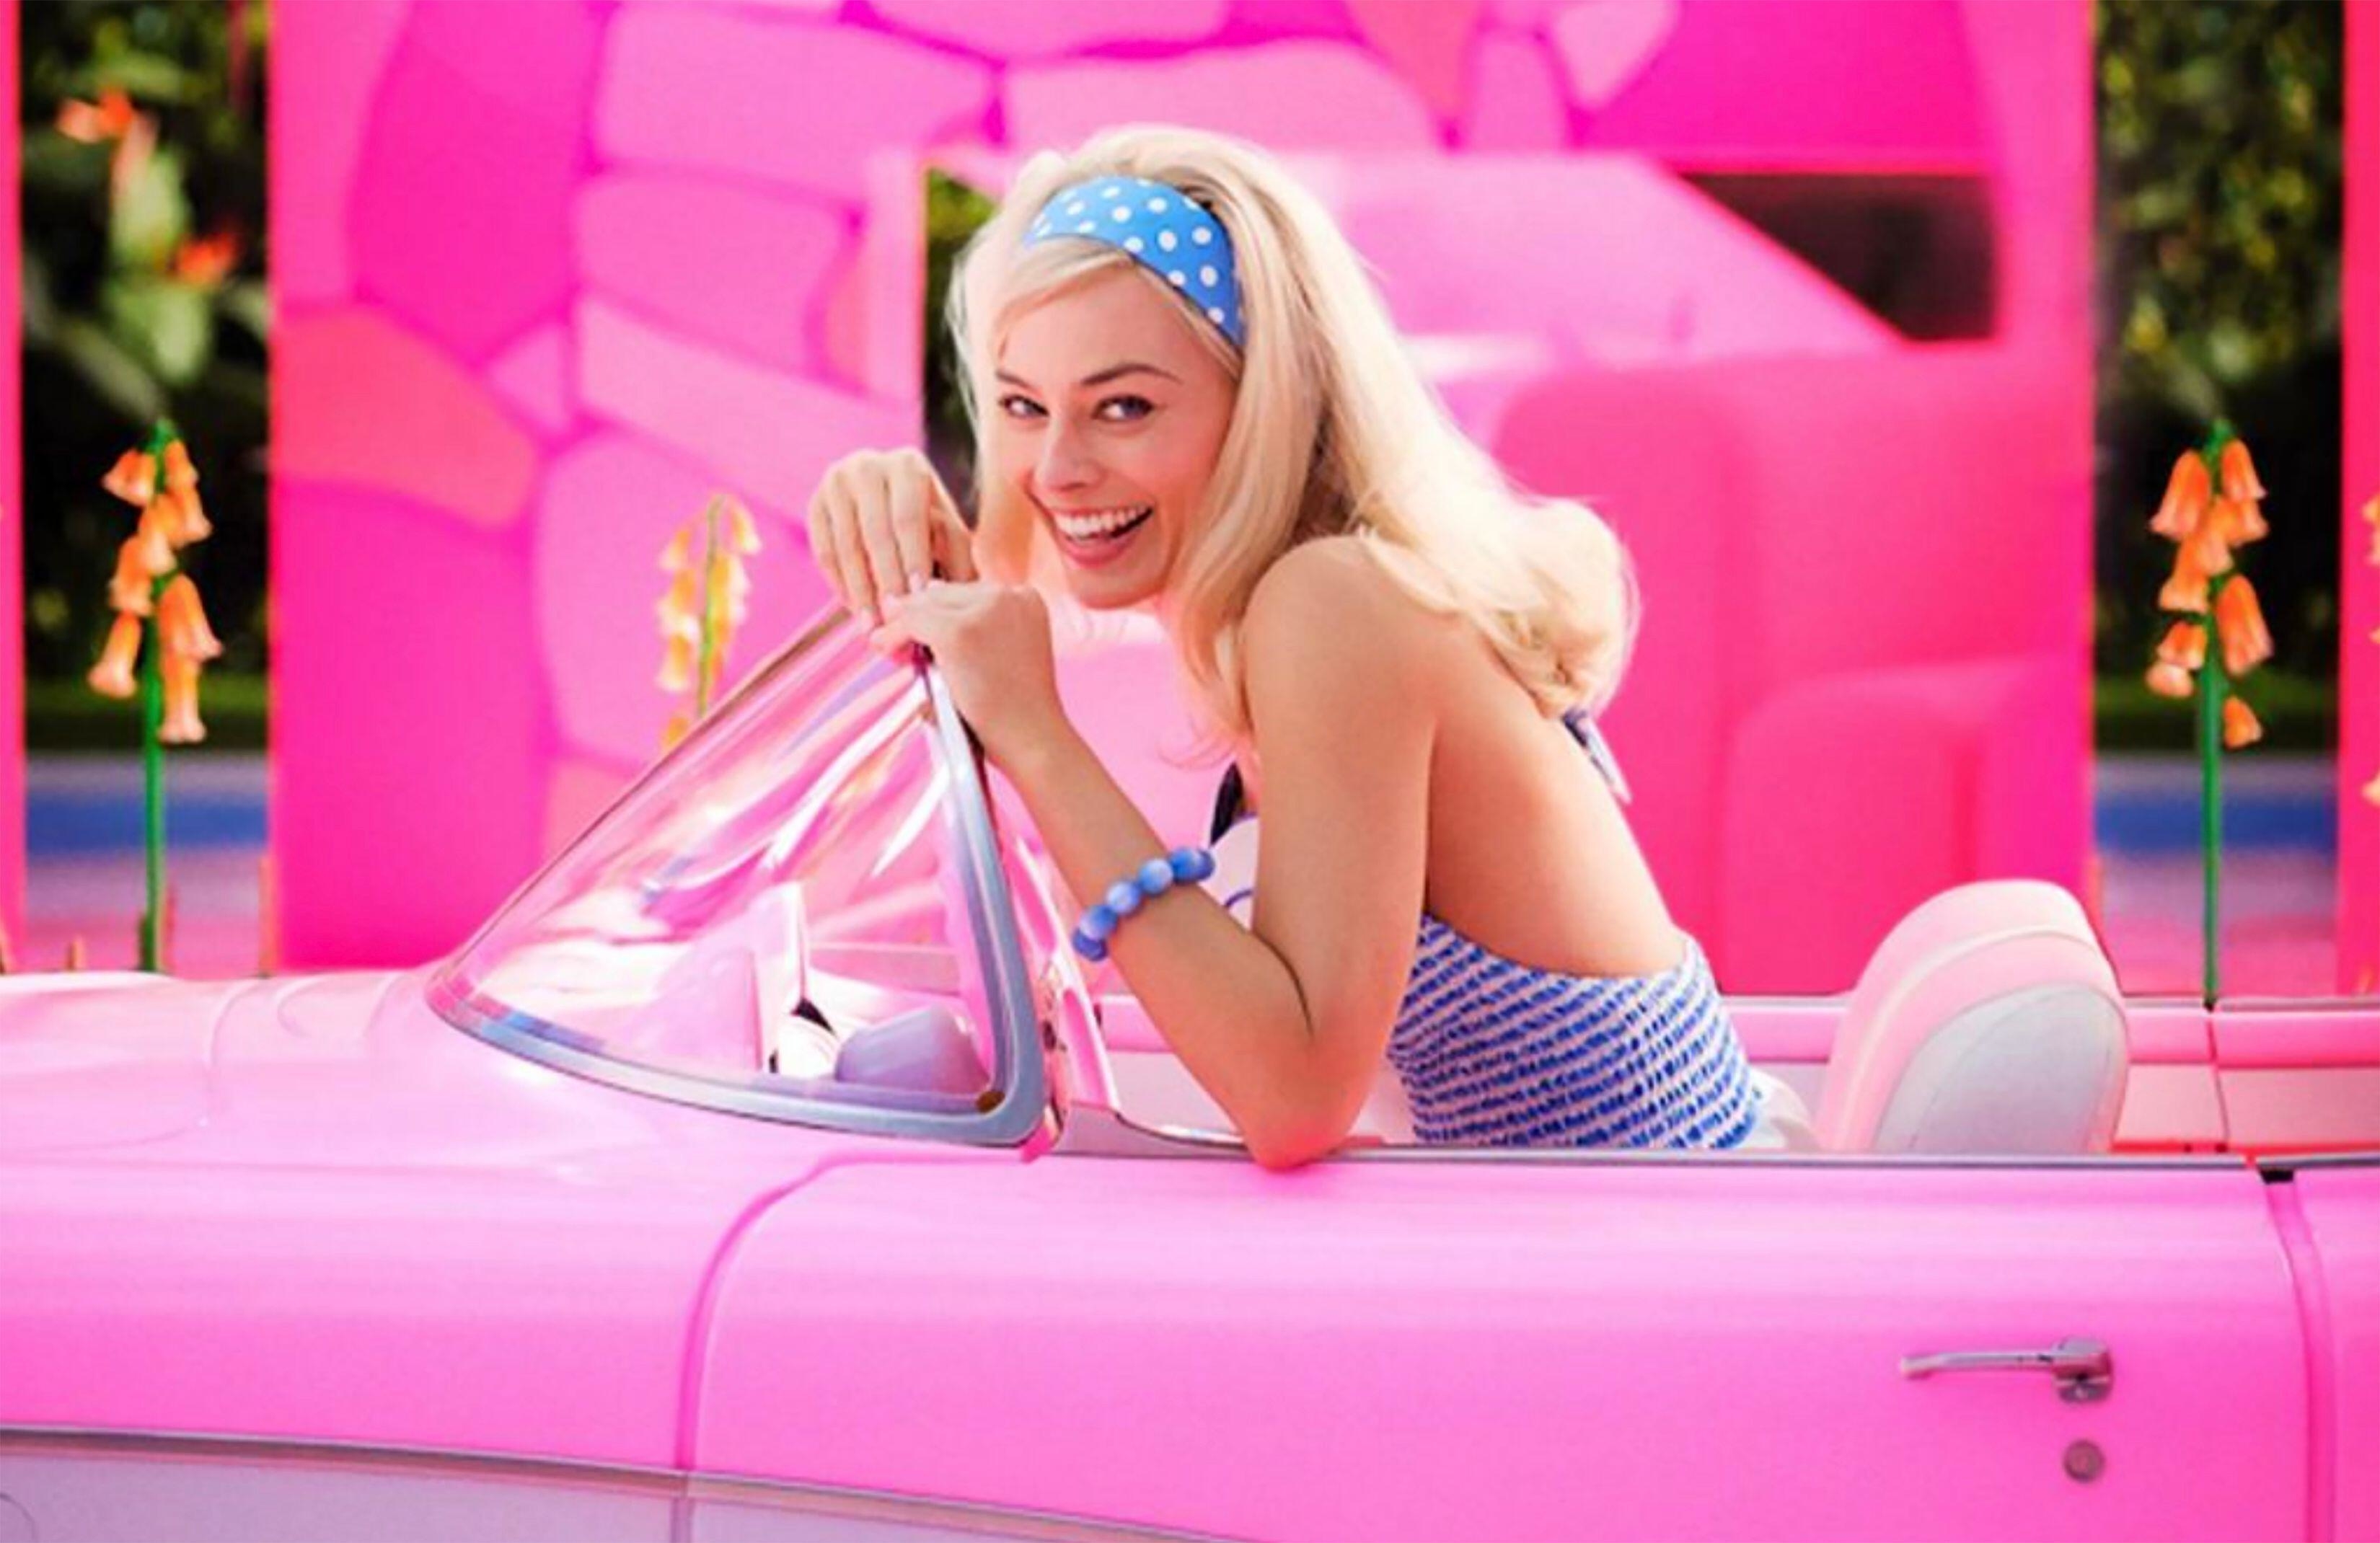 Margot Robbie as Barbie in a pink convertible car in the movie